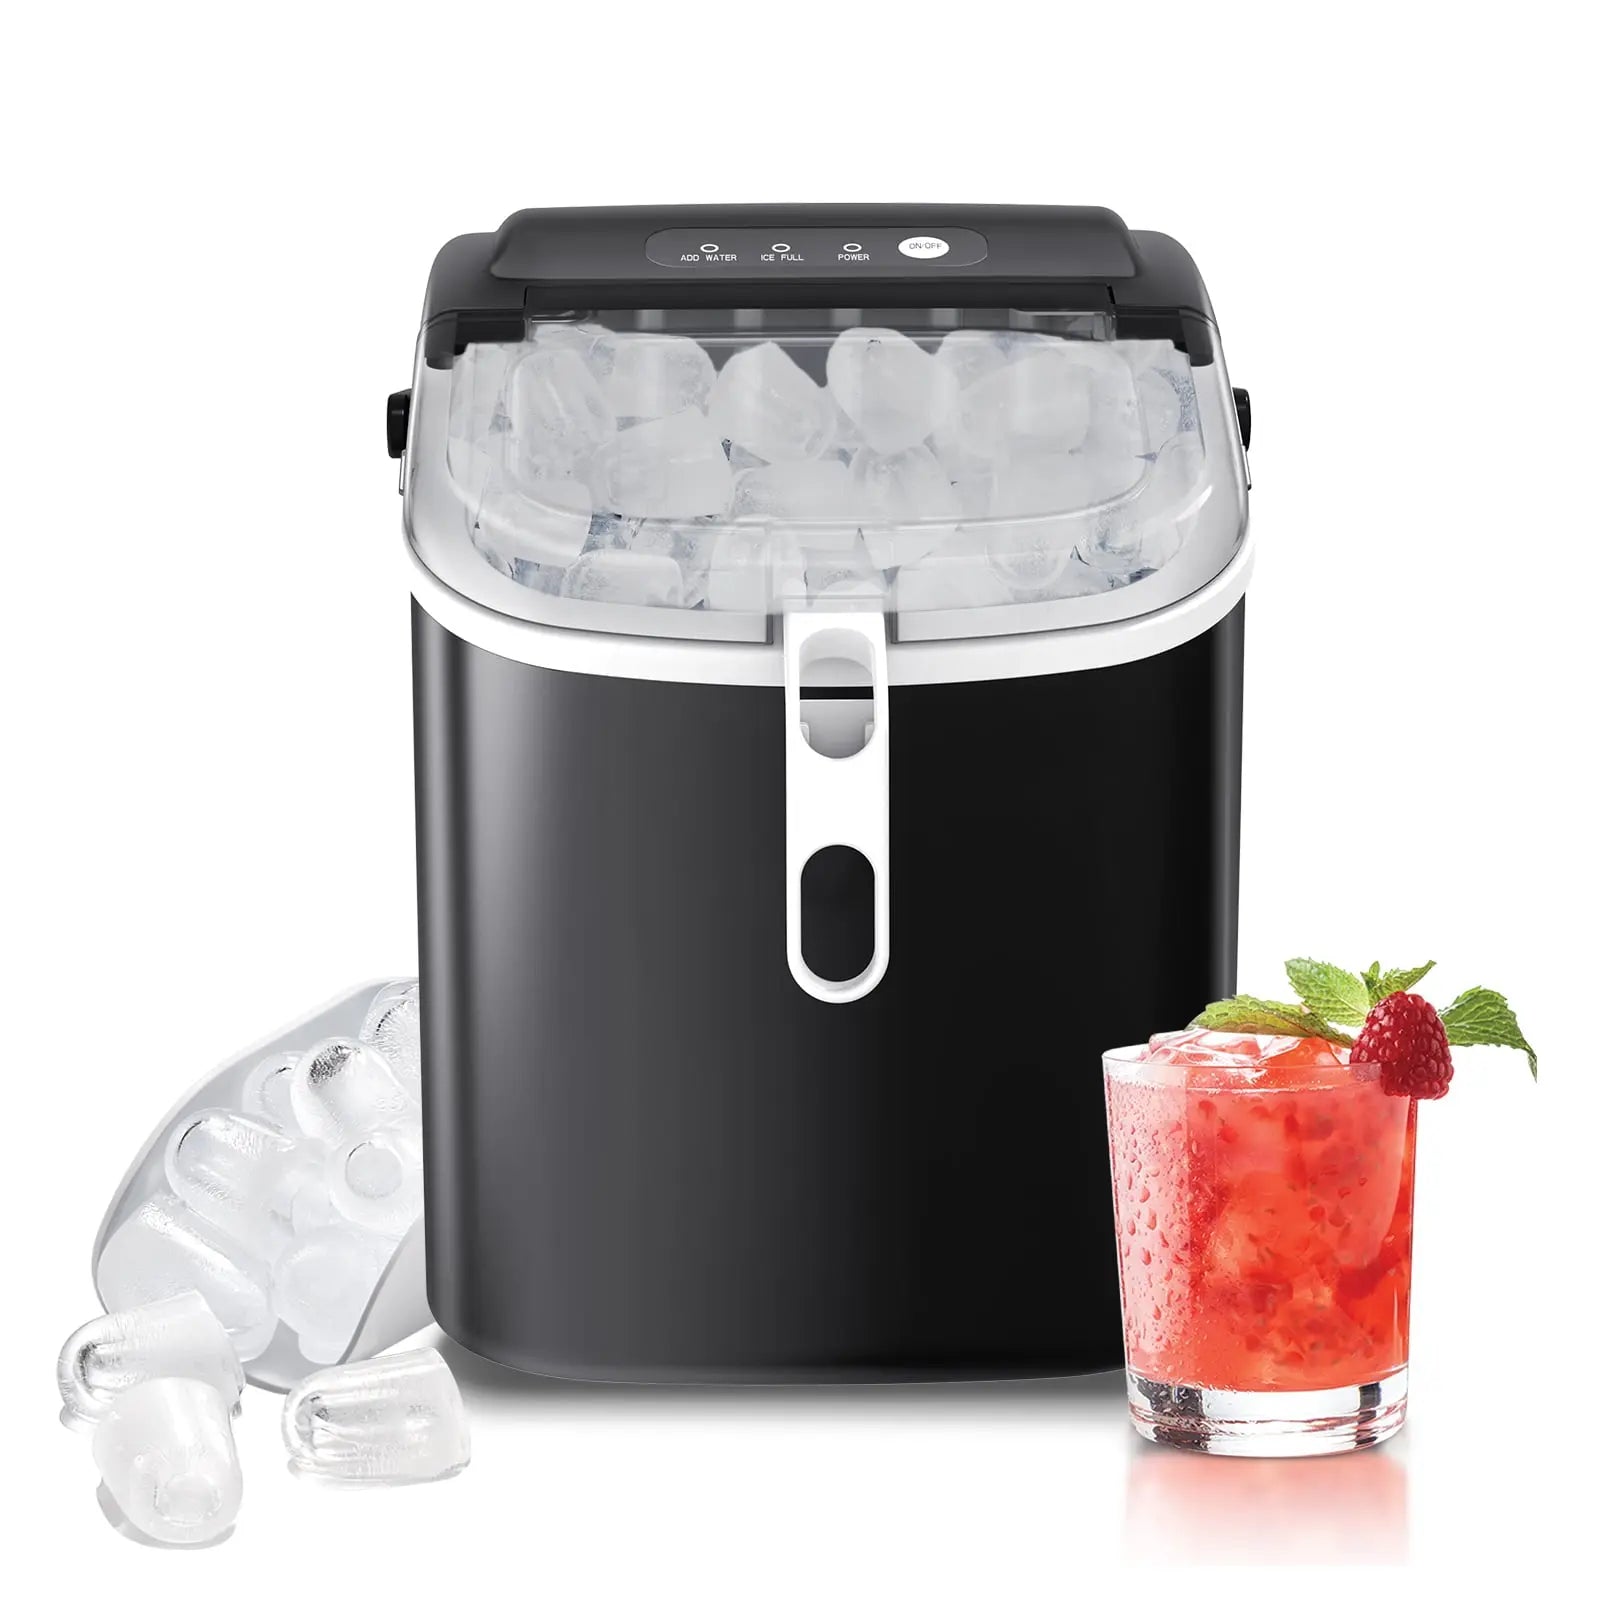 AGLUCKY Countertop Ice Maker Machine 6-Minute Fast Bullet Ice